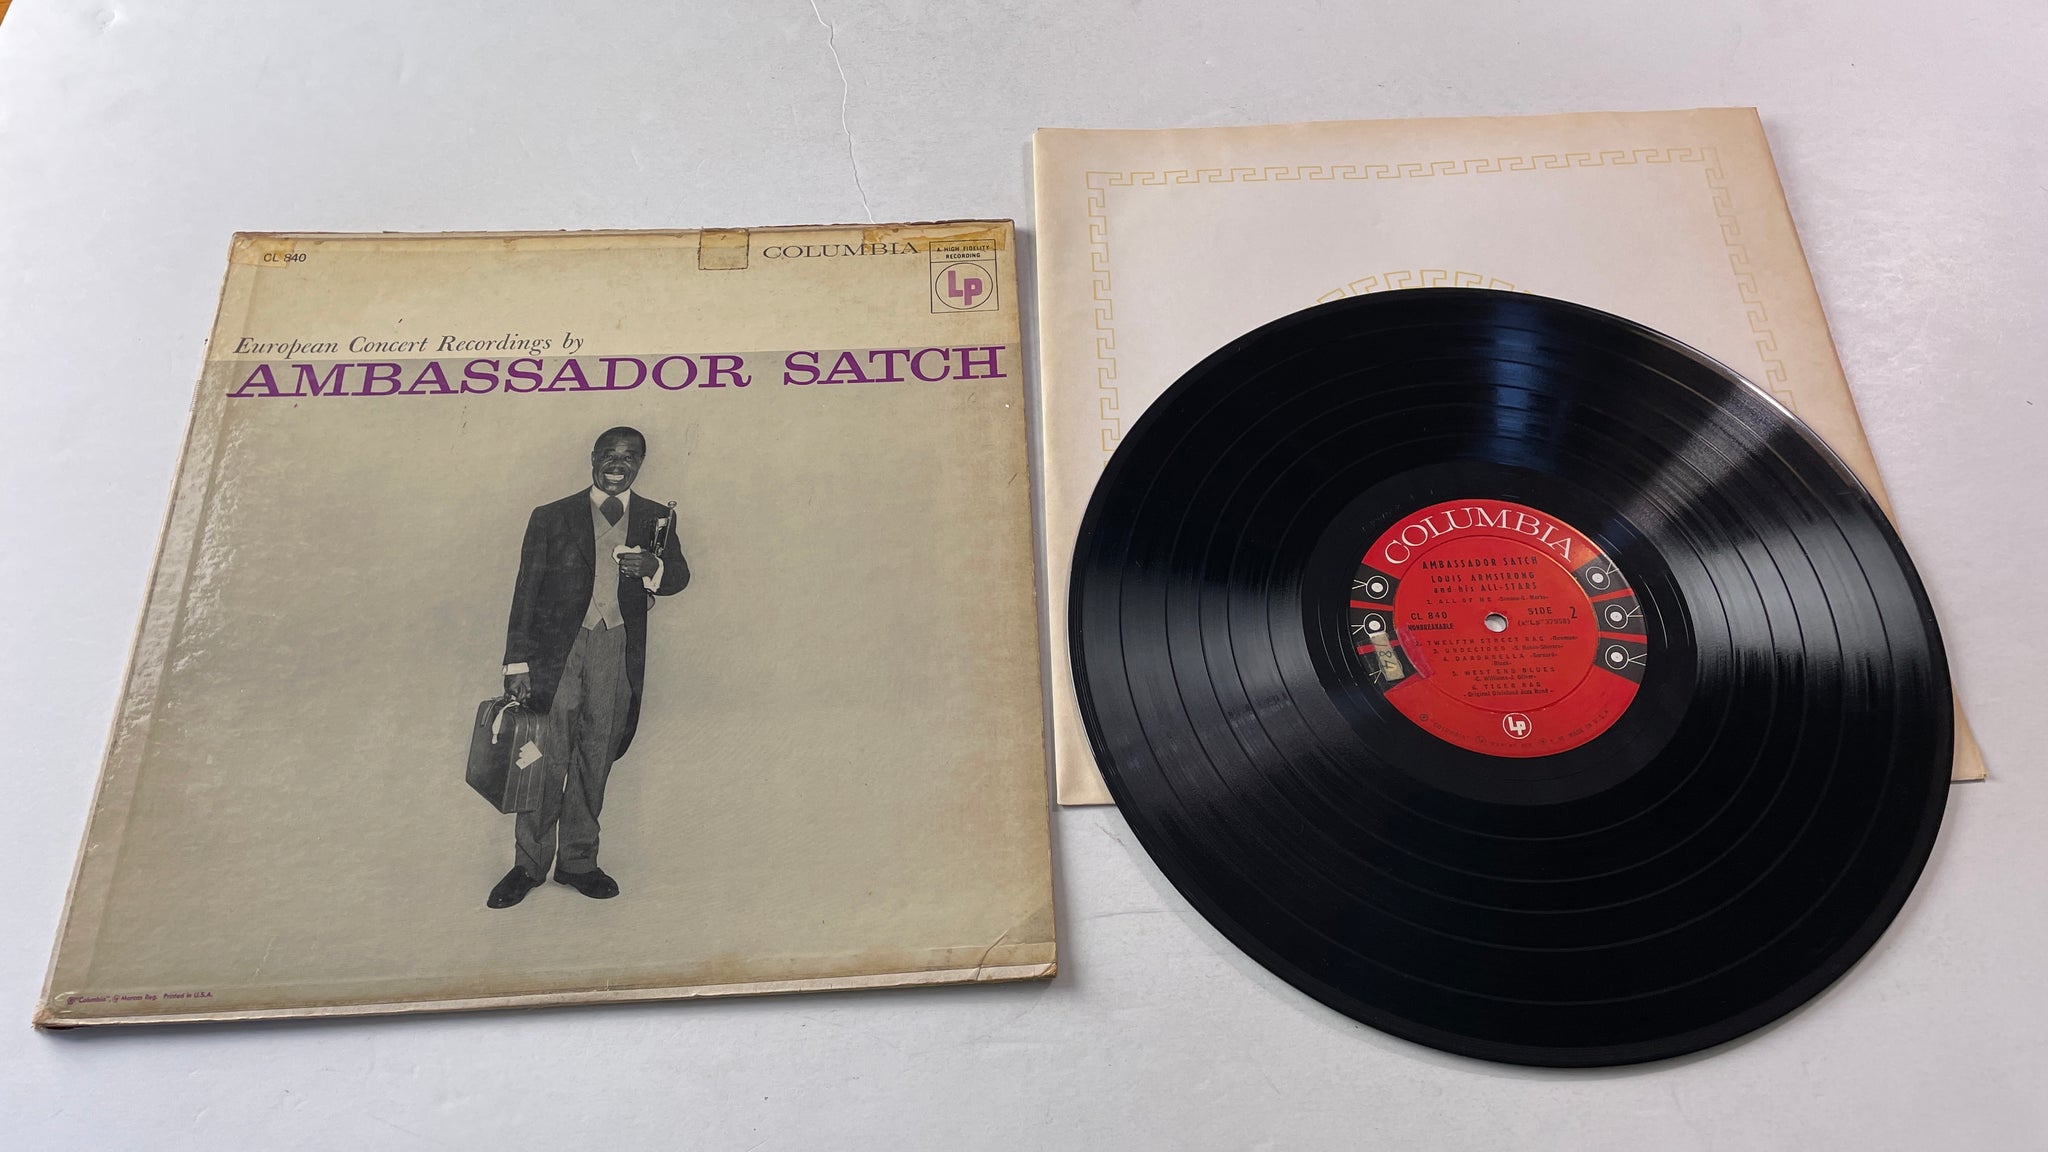 Louis Armstrong And His All-Stars: Ambassador Satch, 12 LP Record, VG+